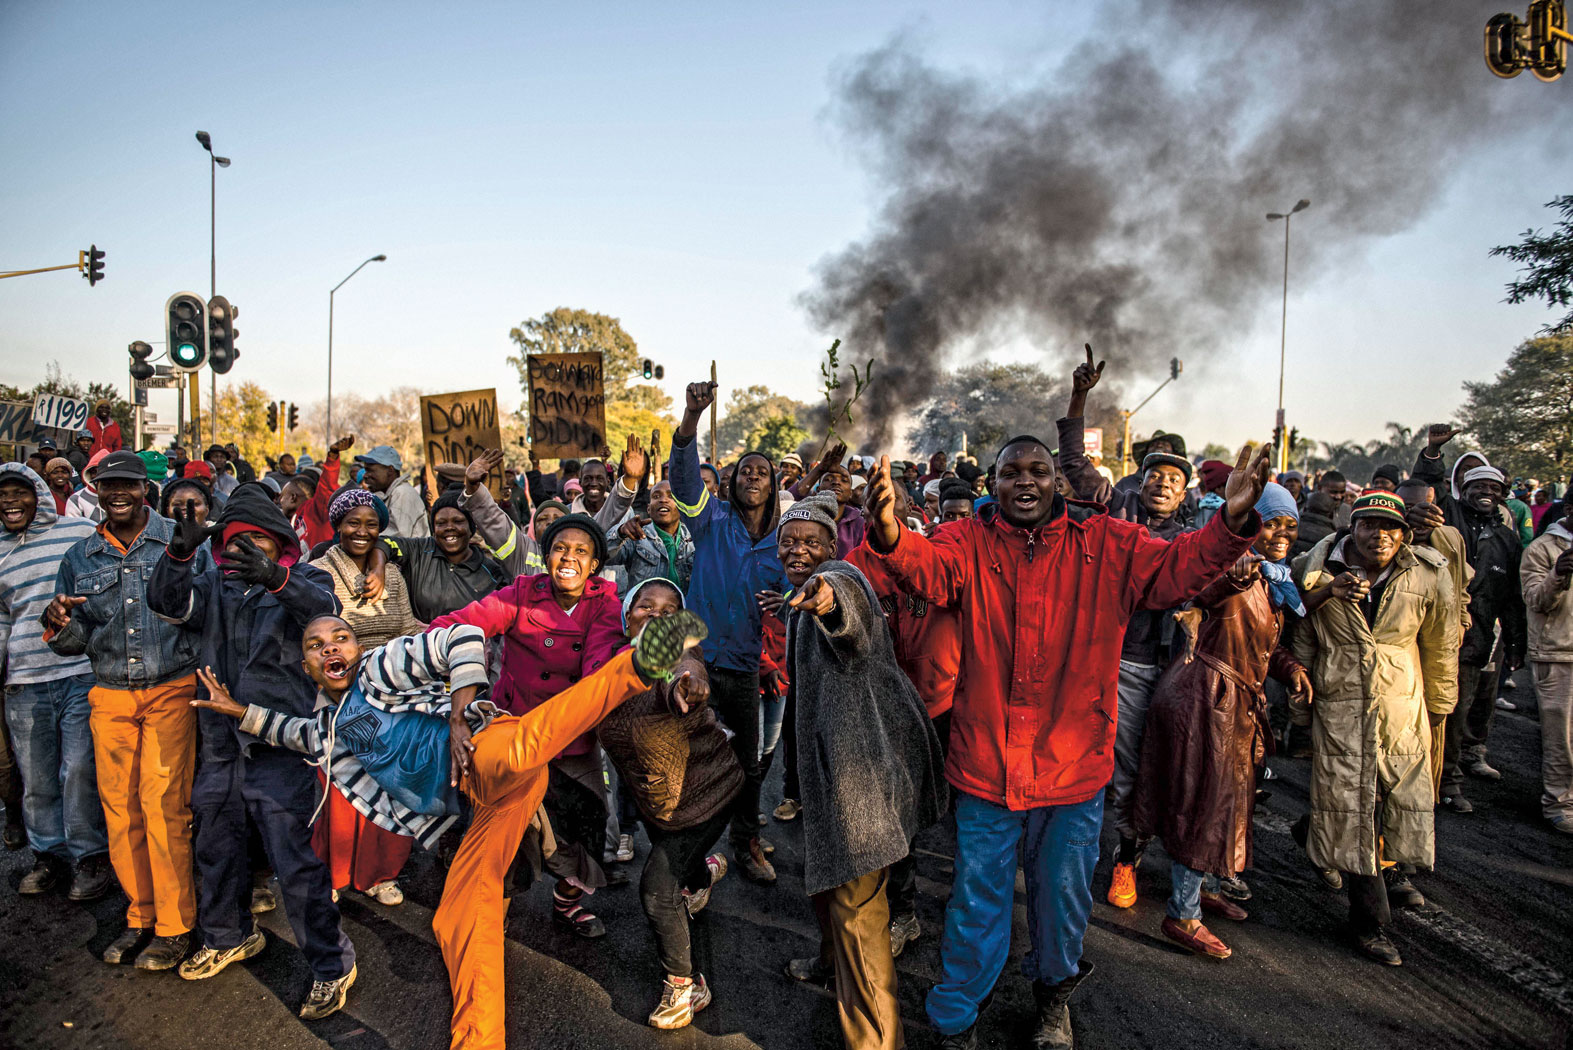 Riots In South Africa: Causes, Interests And Consequences